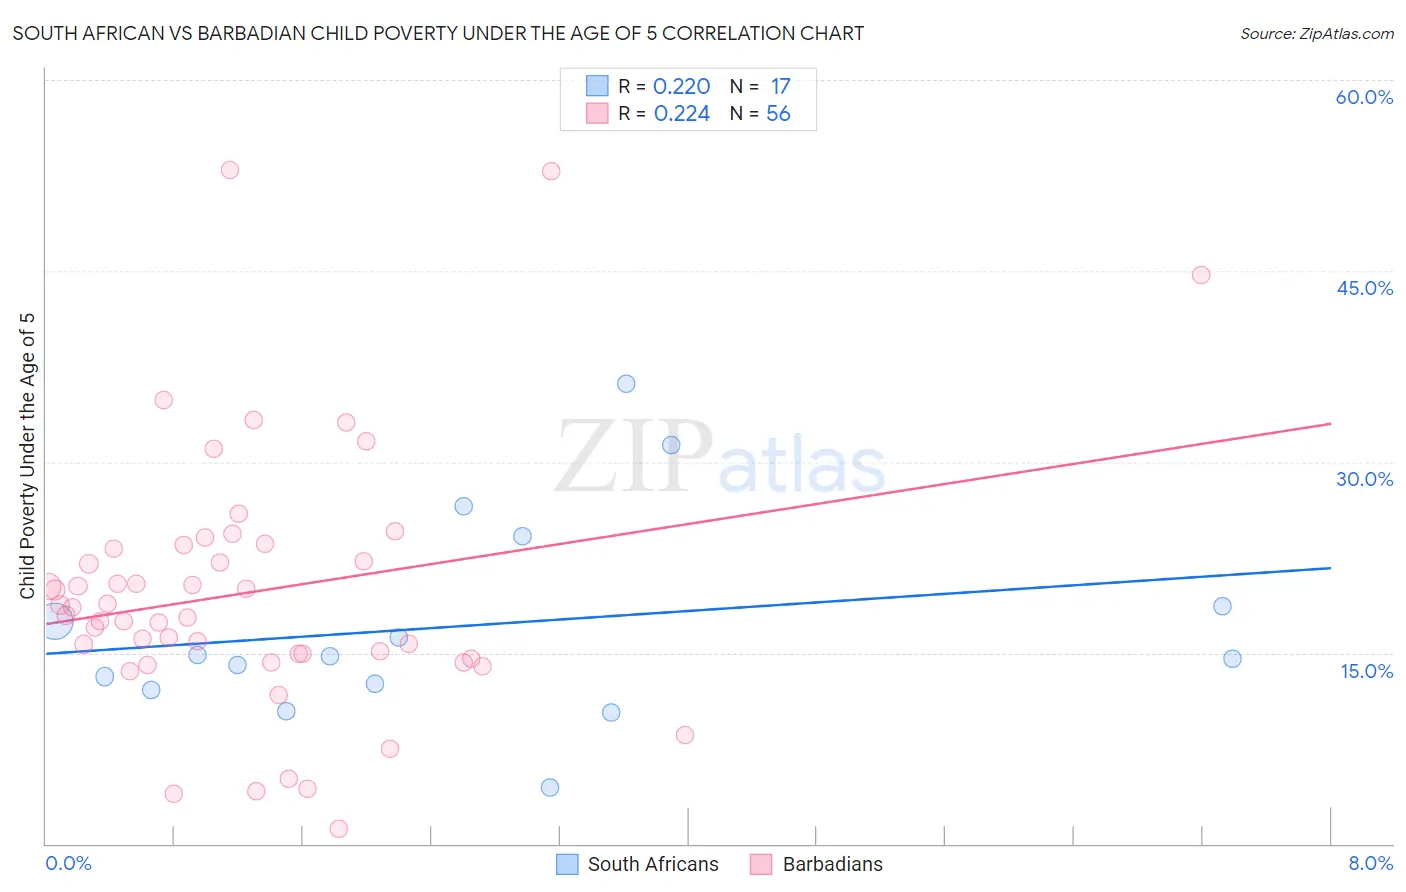 South African vs Barbadian Child Poverty Under the Age of 5